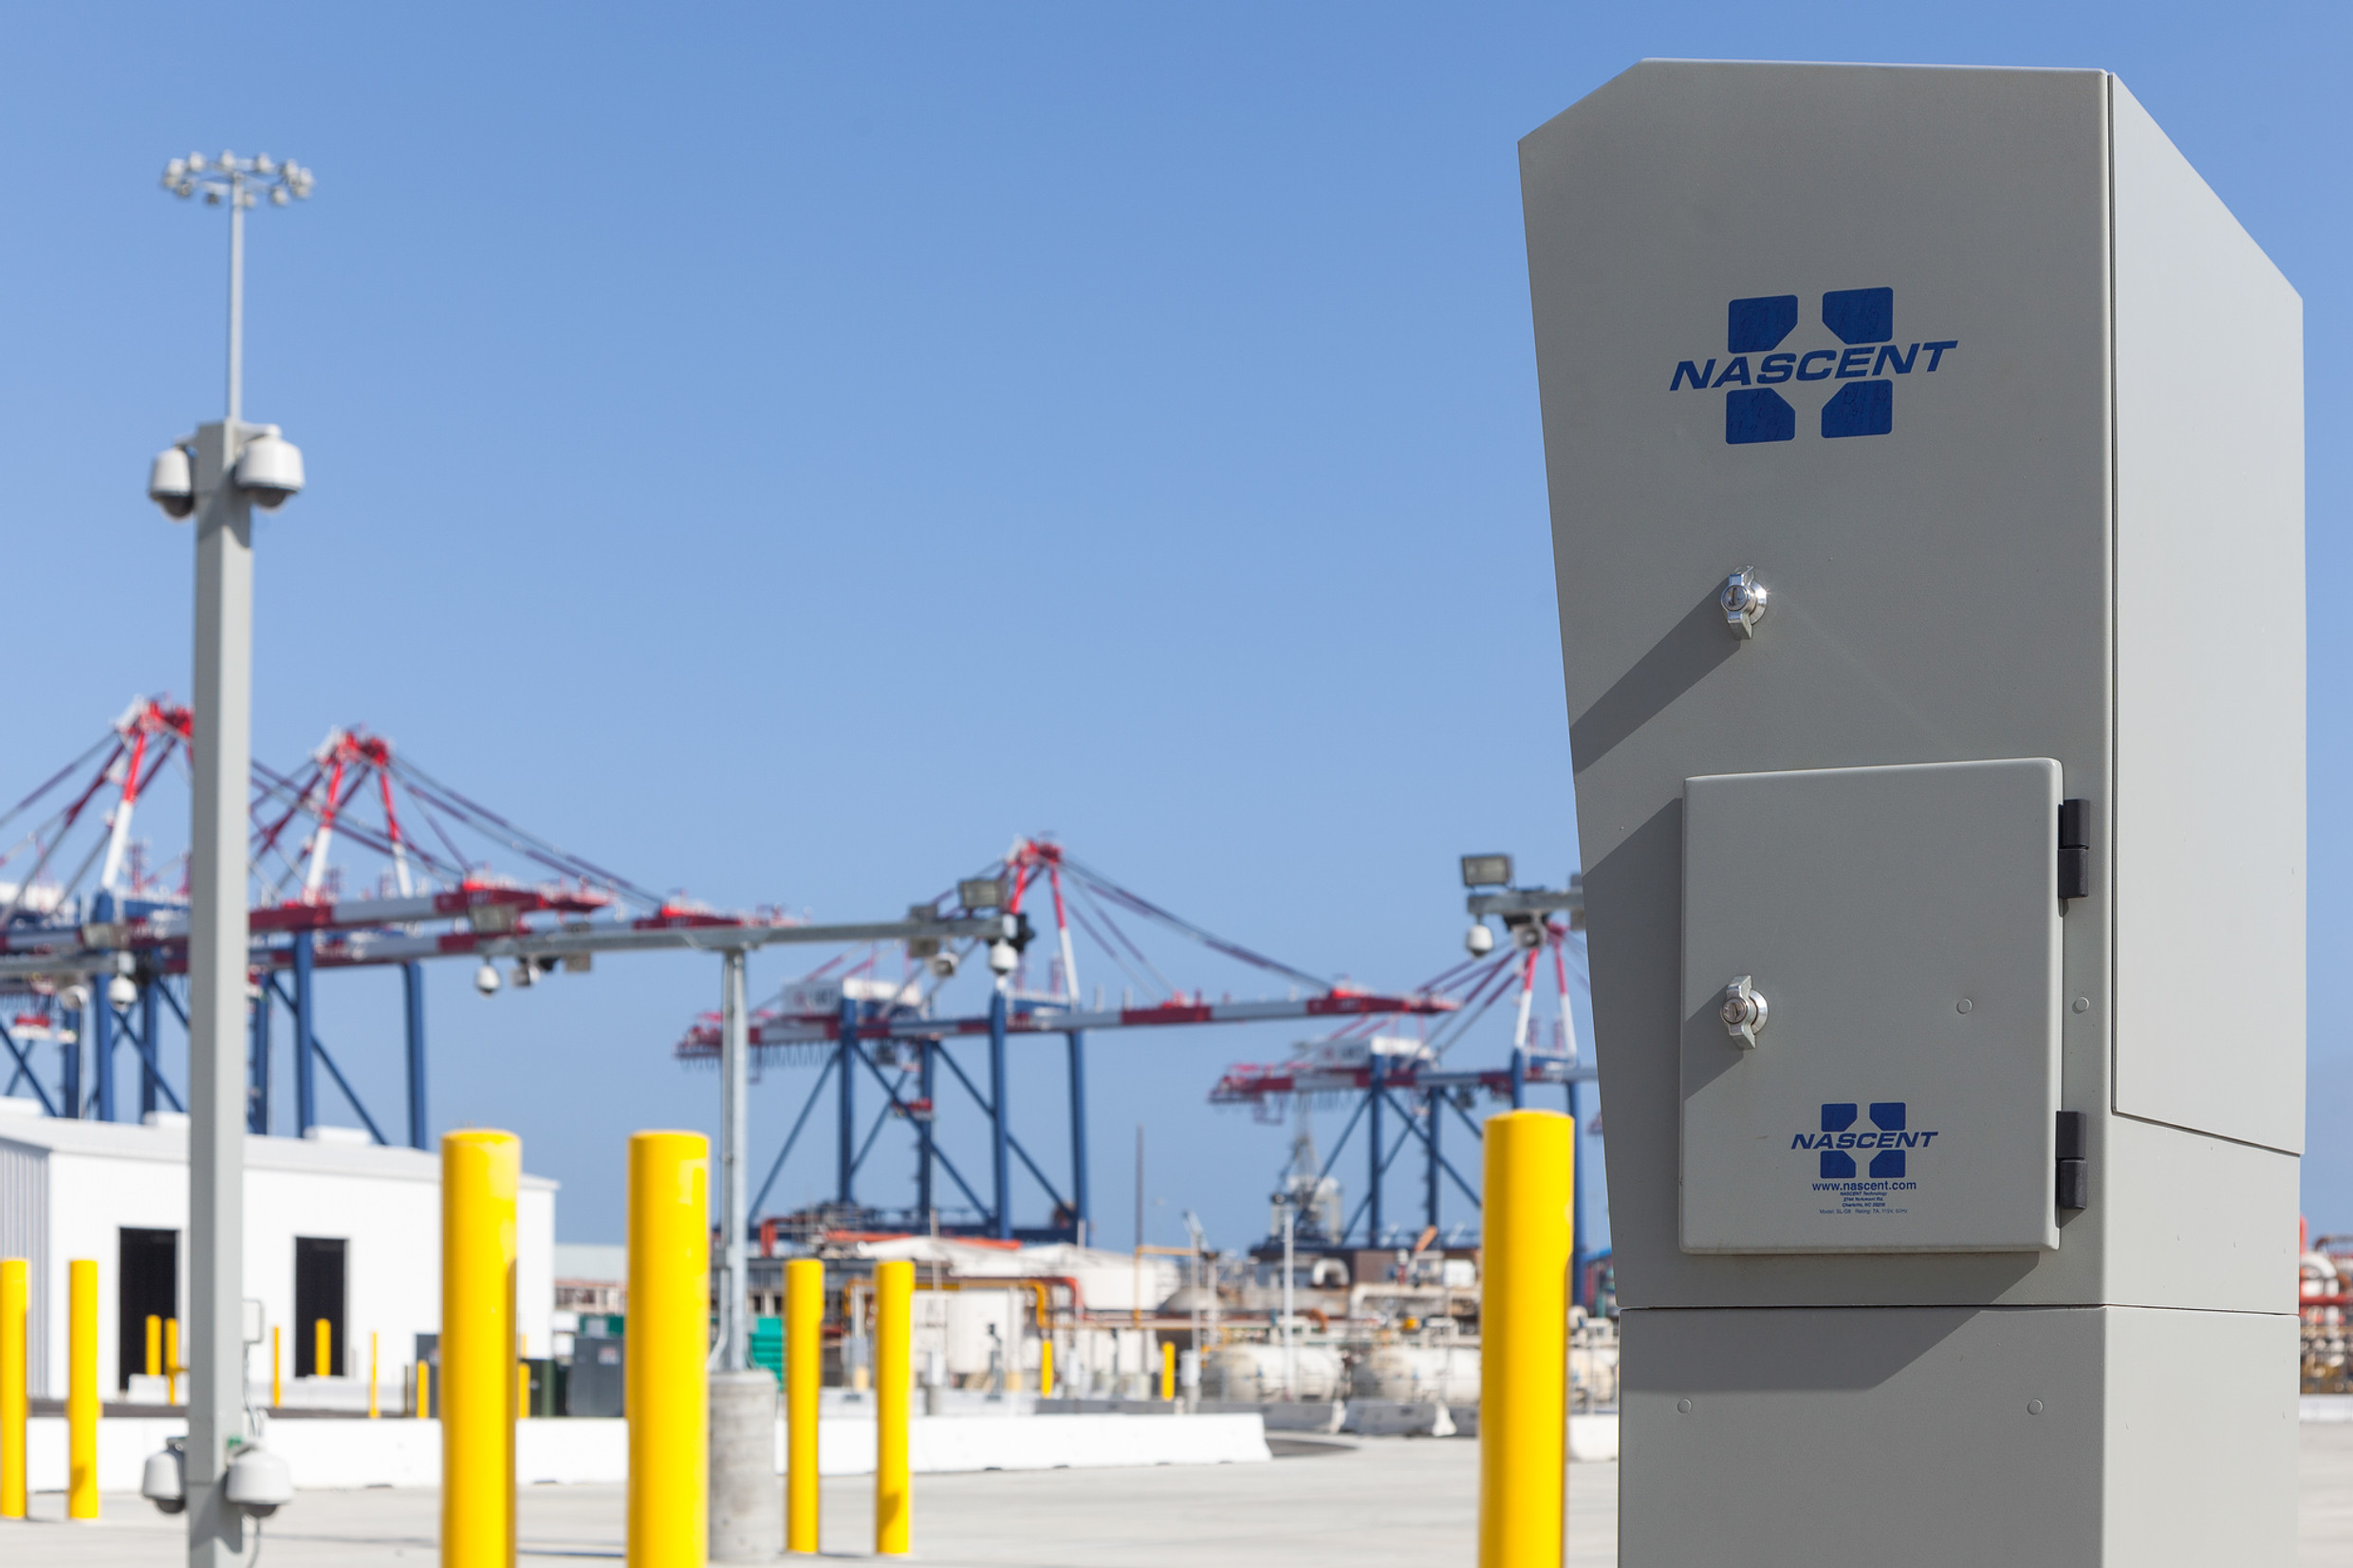 NASCENT’s LivePoint kiosks & callboxes can be configured to meet the specific needs of your port or terminal.